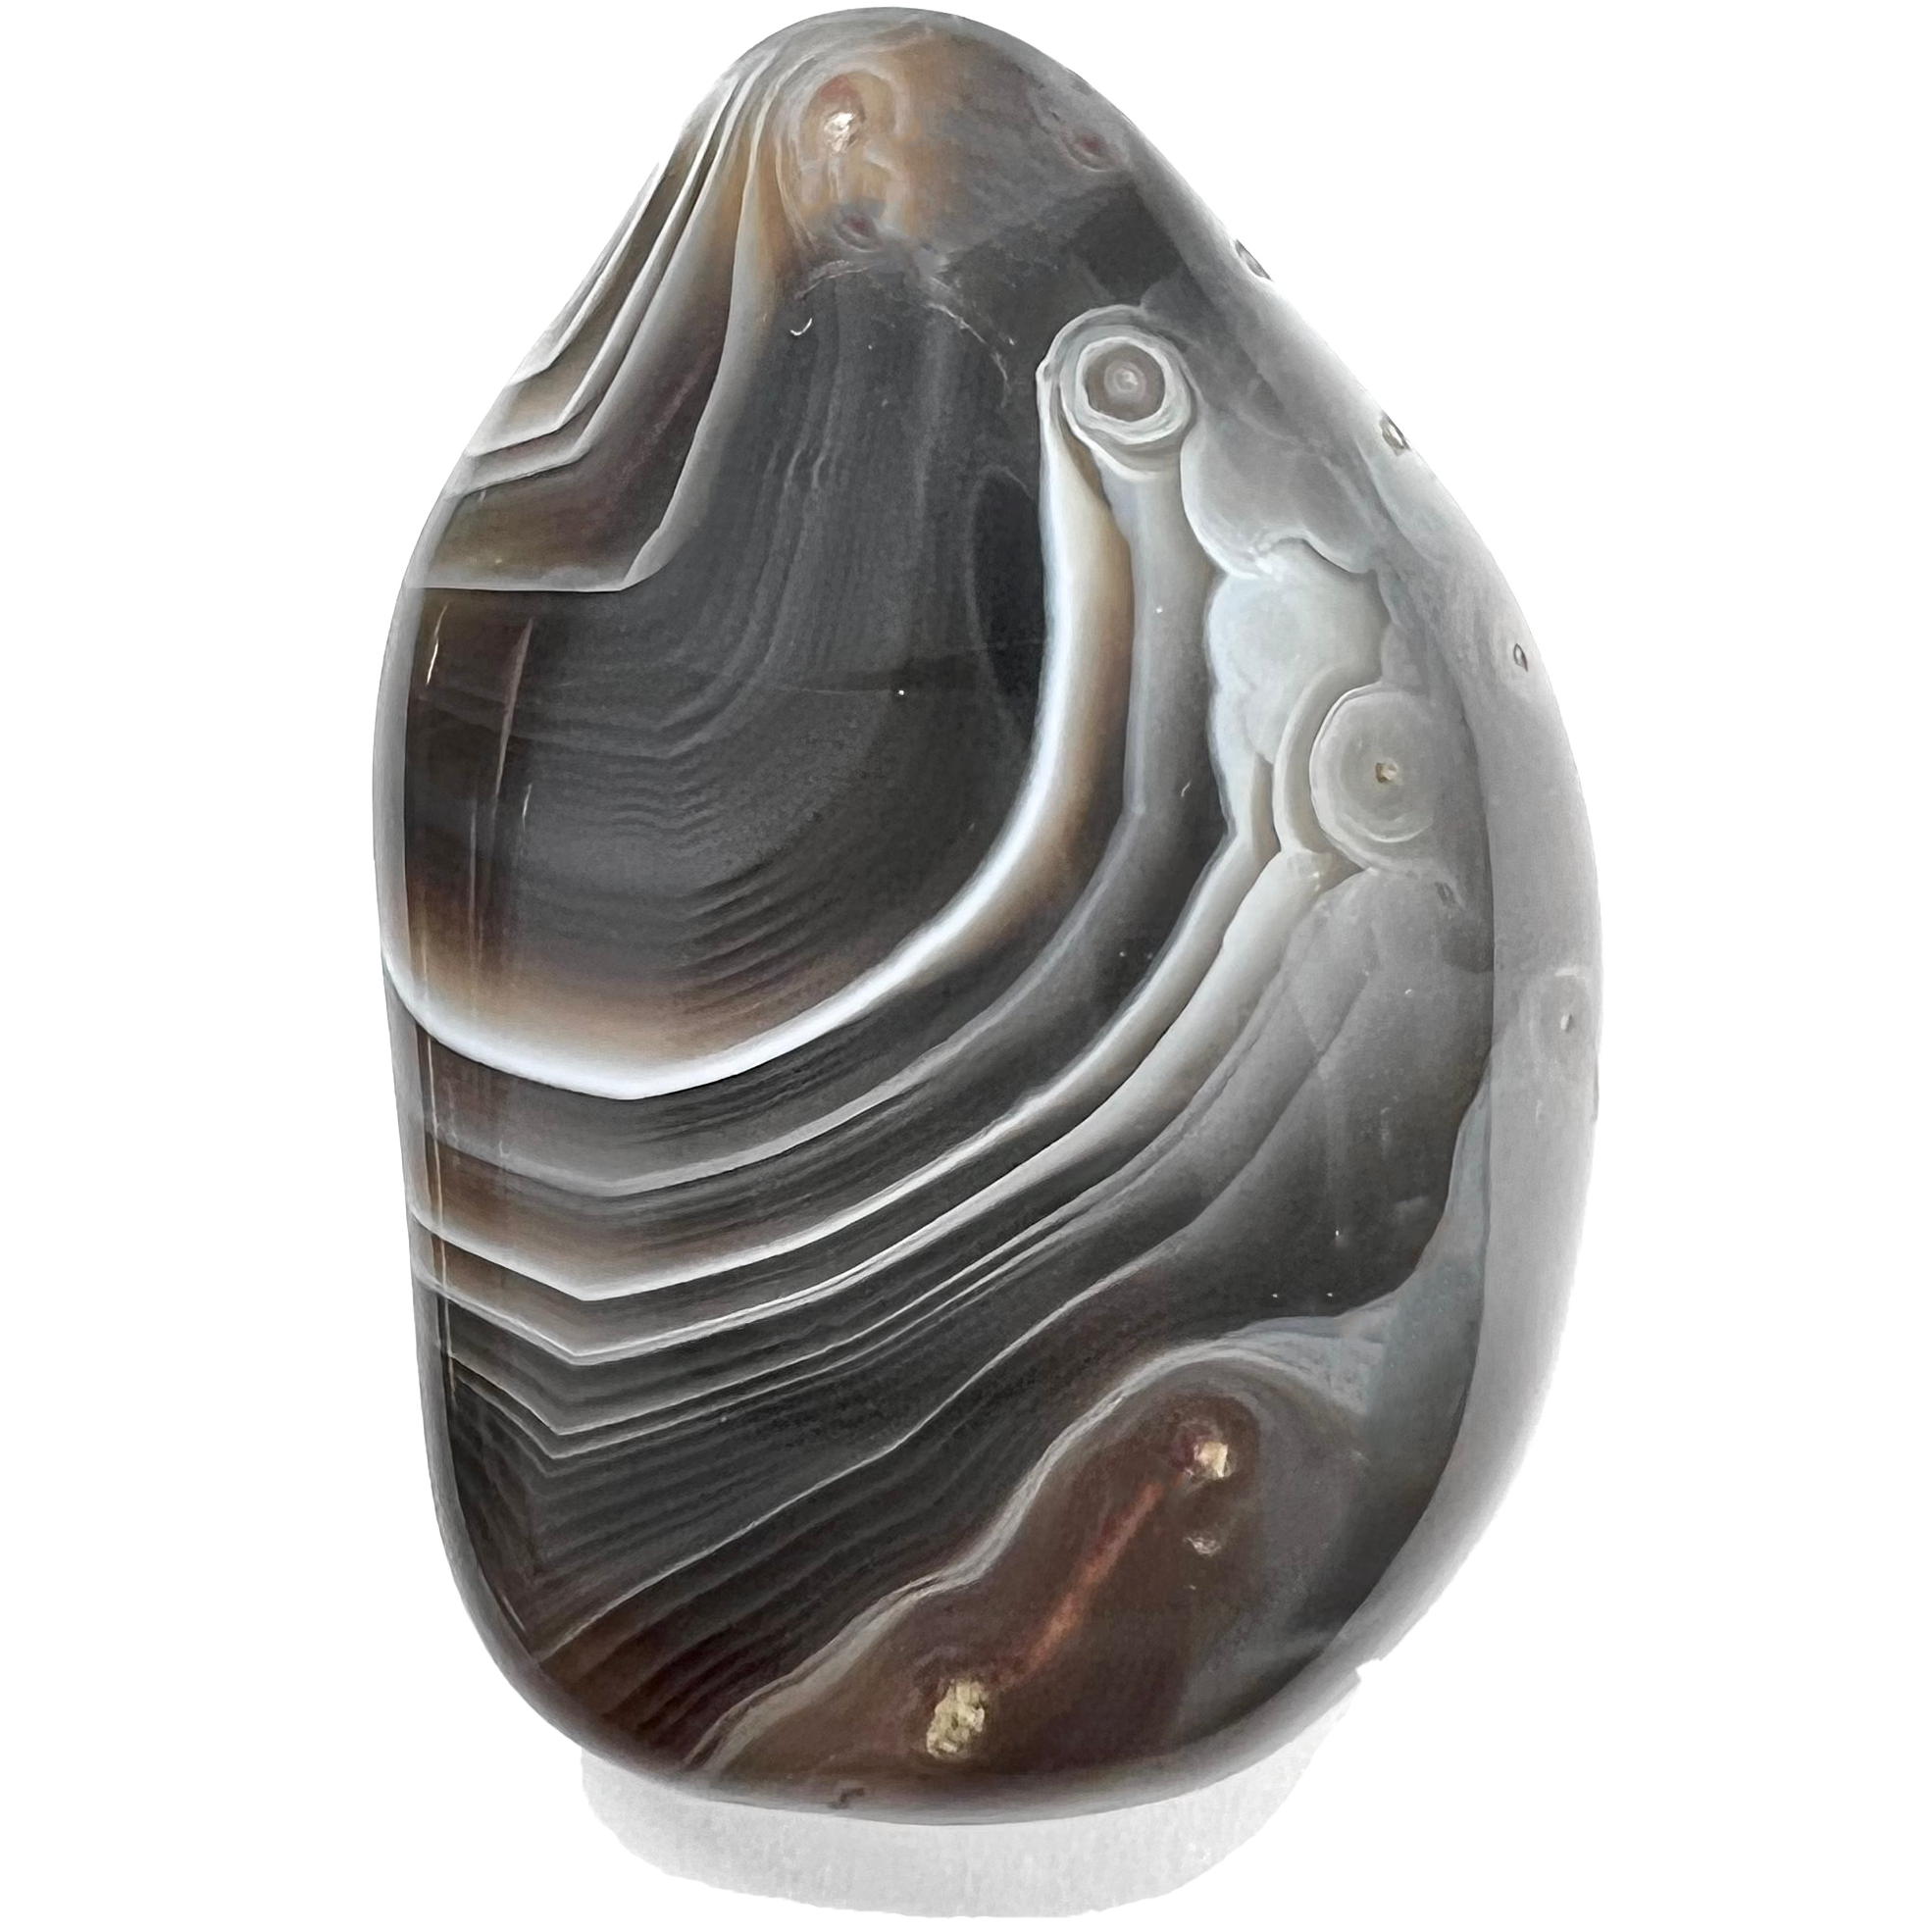 A tumble polished piece of banded agate stone.  The stone is dark gray with white and brown bands.